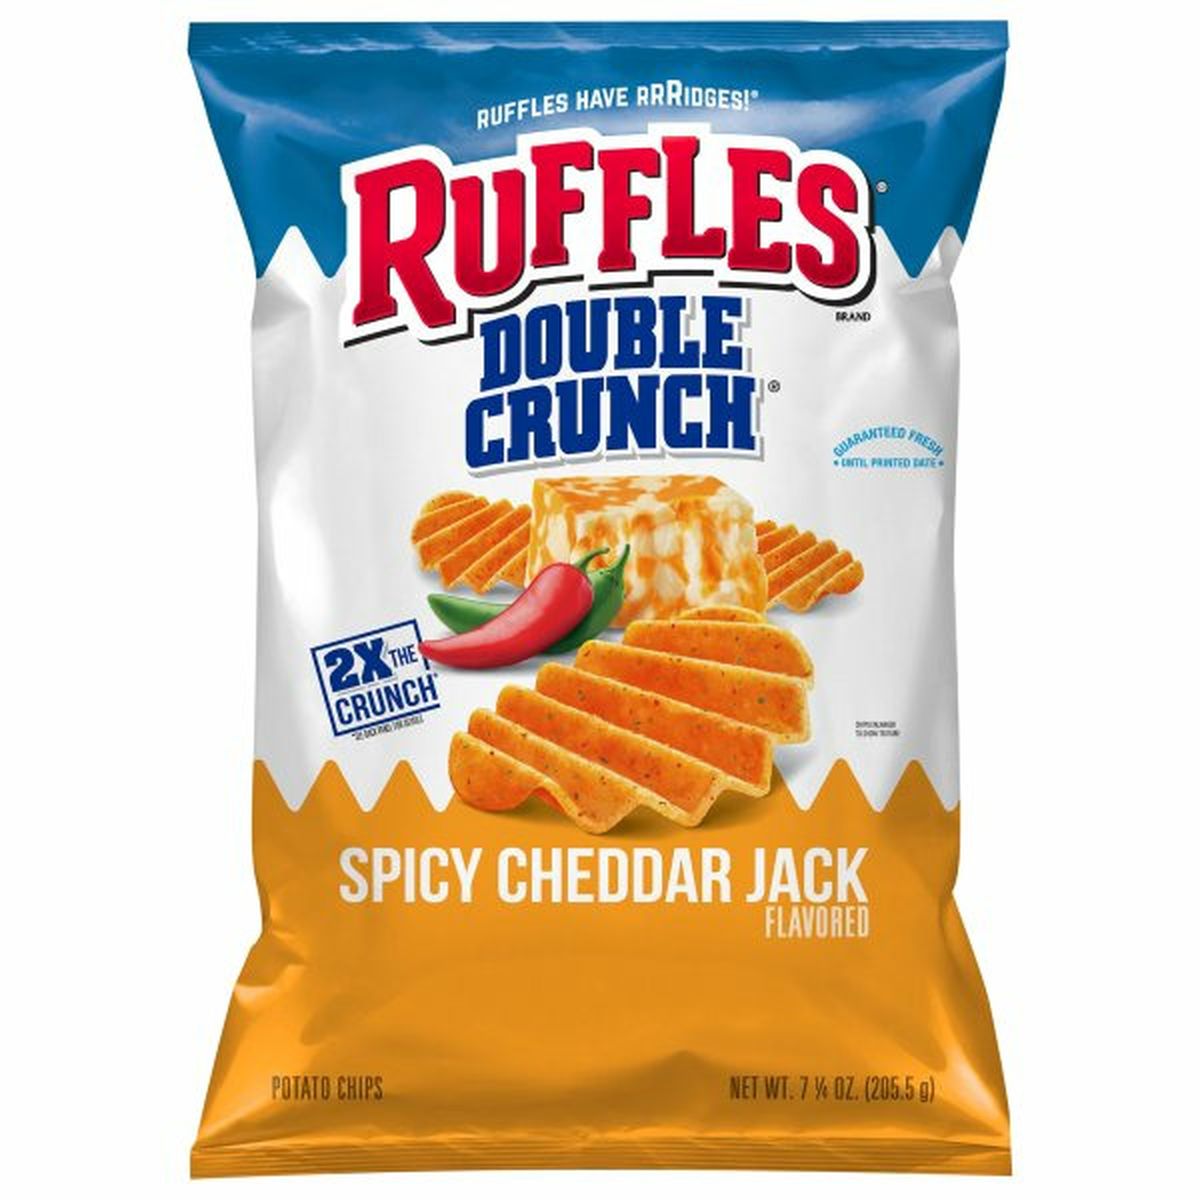 Calories in Ruffles Double Crunch Potato Chips, Spicy Cheddar Jack Flavored